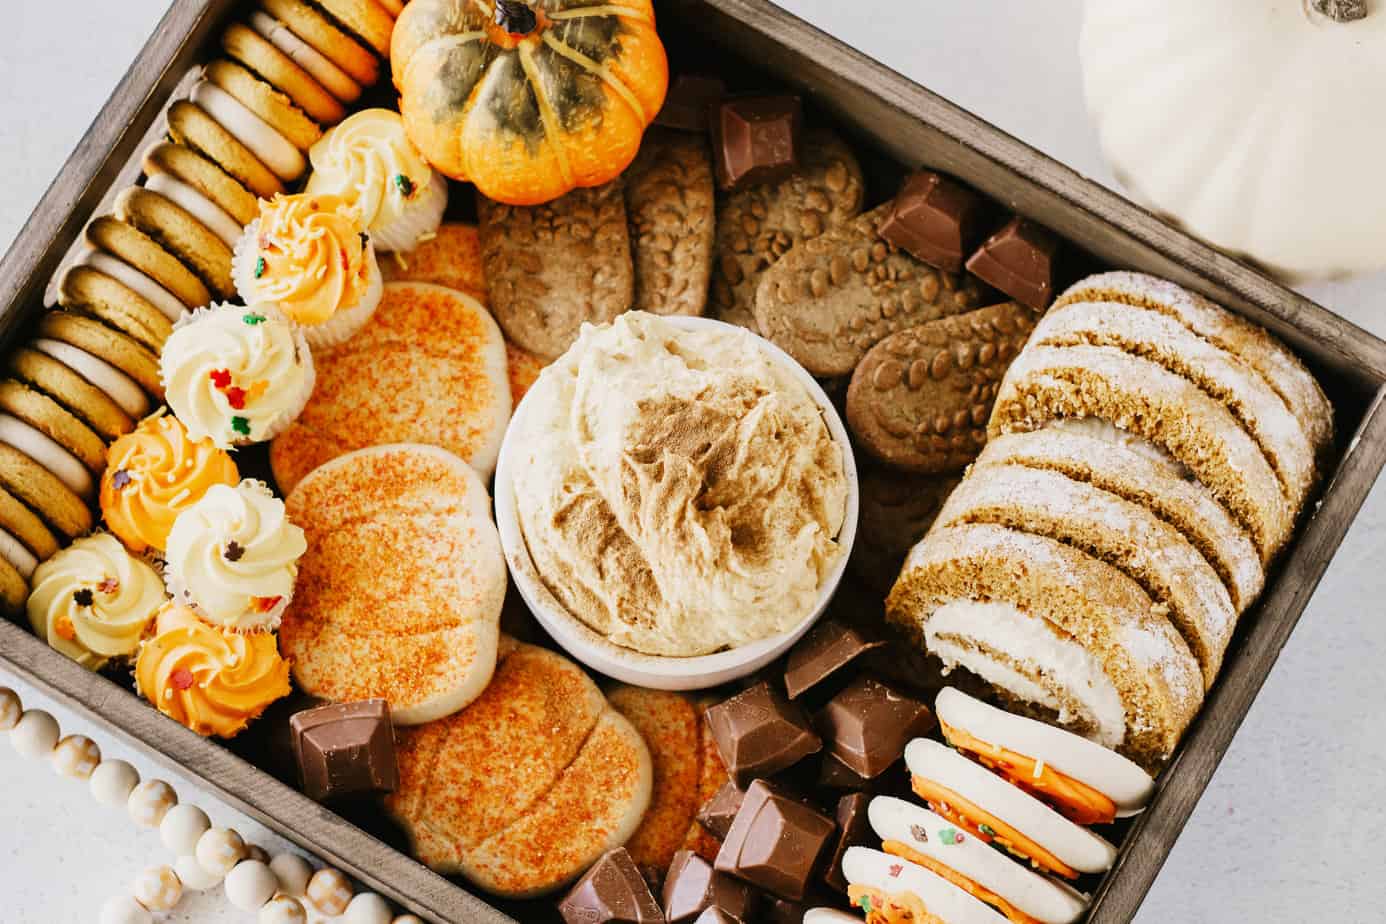 Pumpkin Cream Cheese Dip in a white bowl in the middle of a dessert board filled with cookies and candies